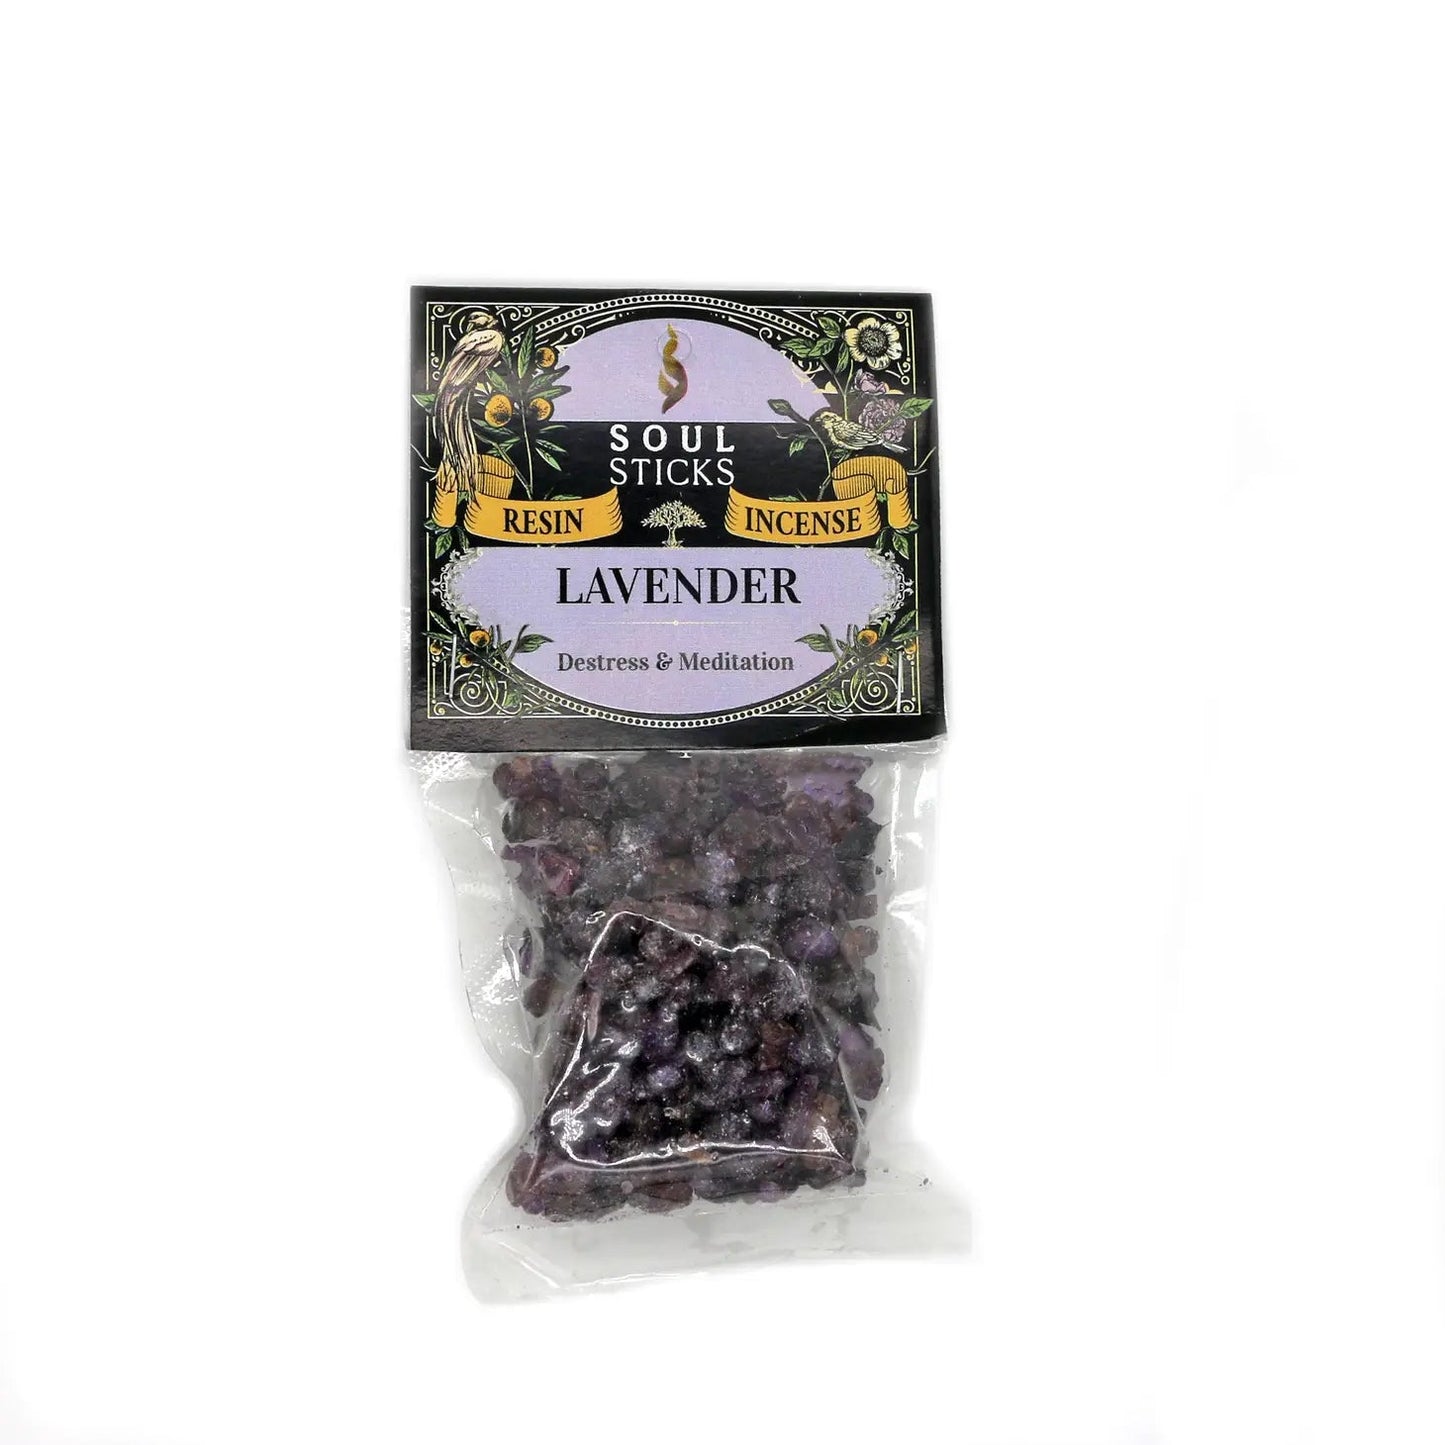 Lavender Natural Resin Incense 1oz Pack - The Hare and the Moon